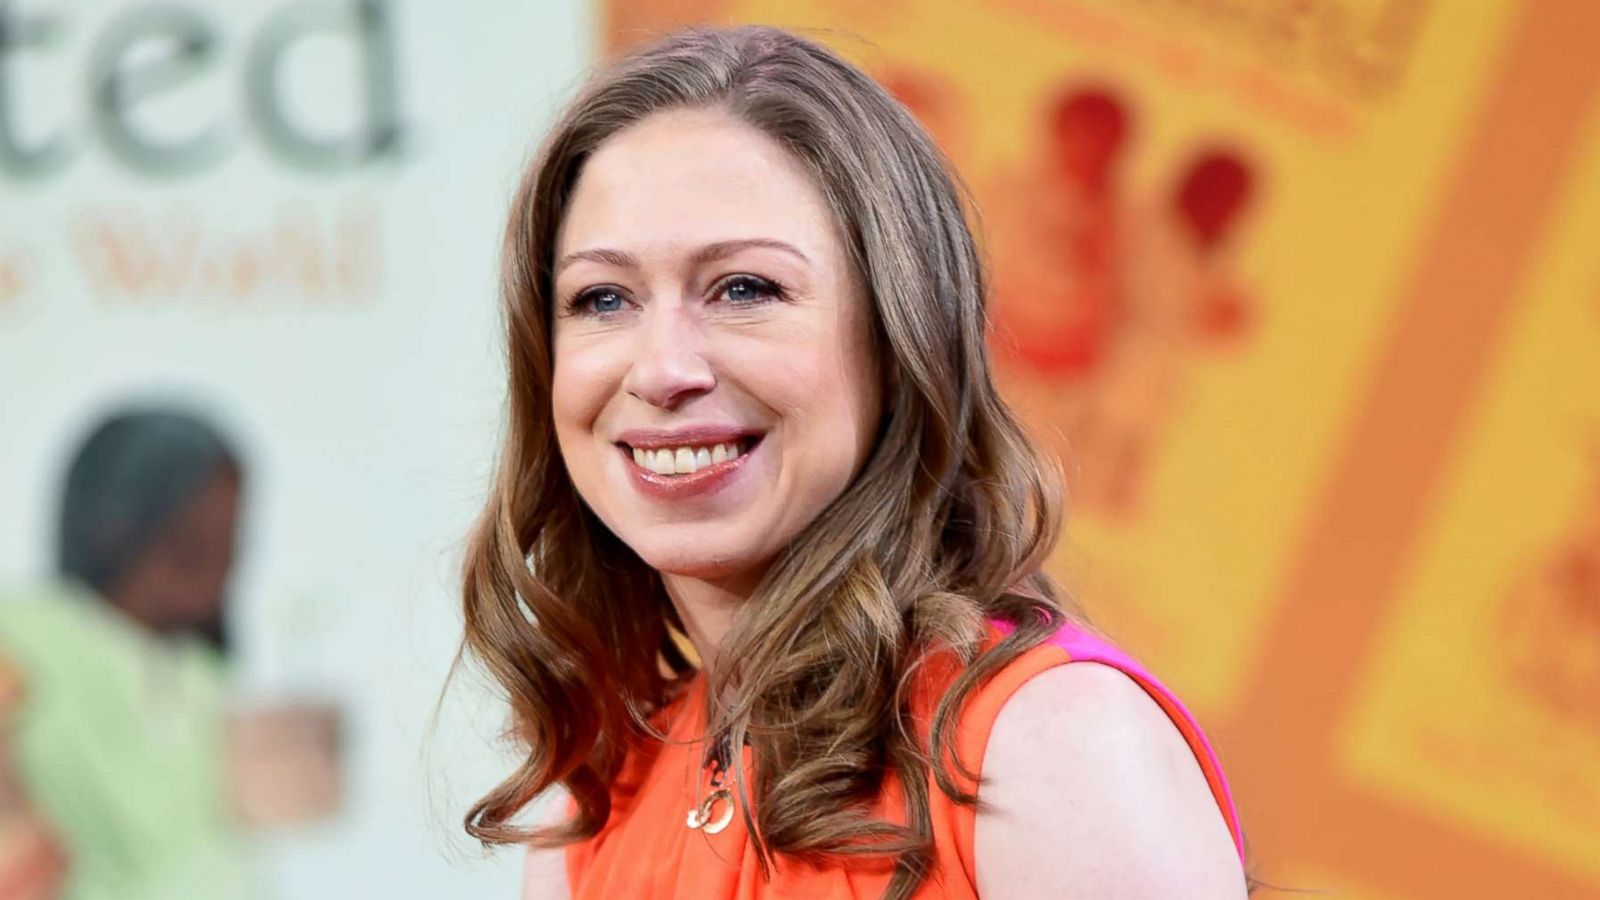 PHOTO: Chelsea Clinton discusses her new children's book "She Persisted Around the World," on "Good Morning America," March 6, 2018.